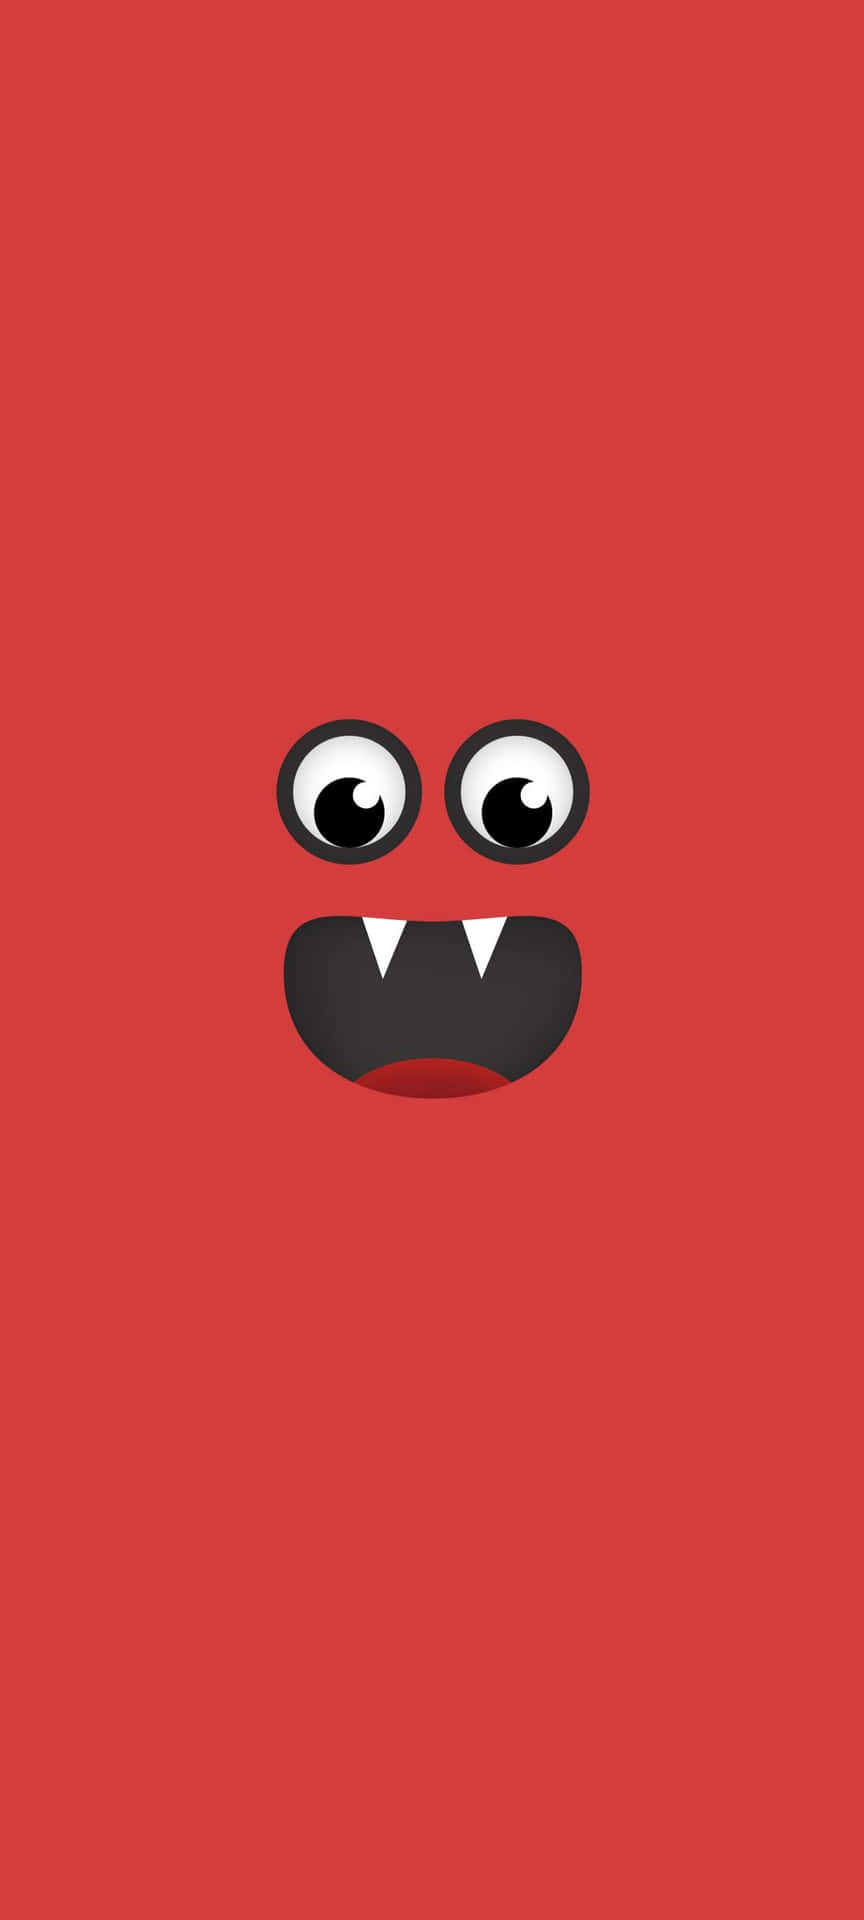 A Red Monster Face With Black Eyes